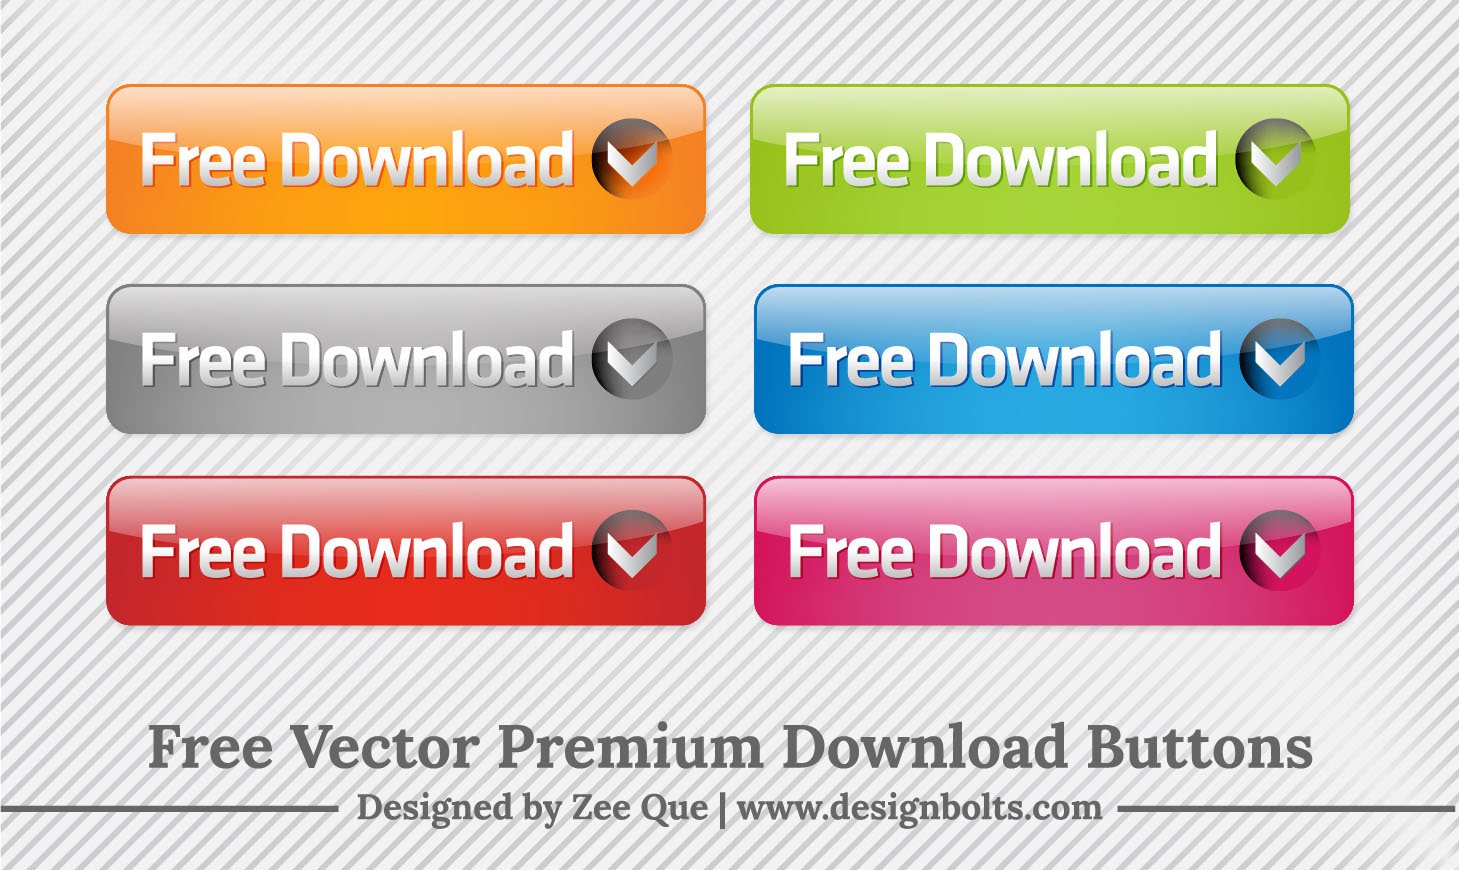 Free Vector Premium Download Button In (.ai & .eps) Format